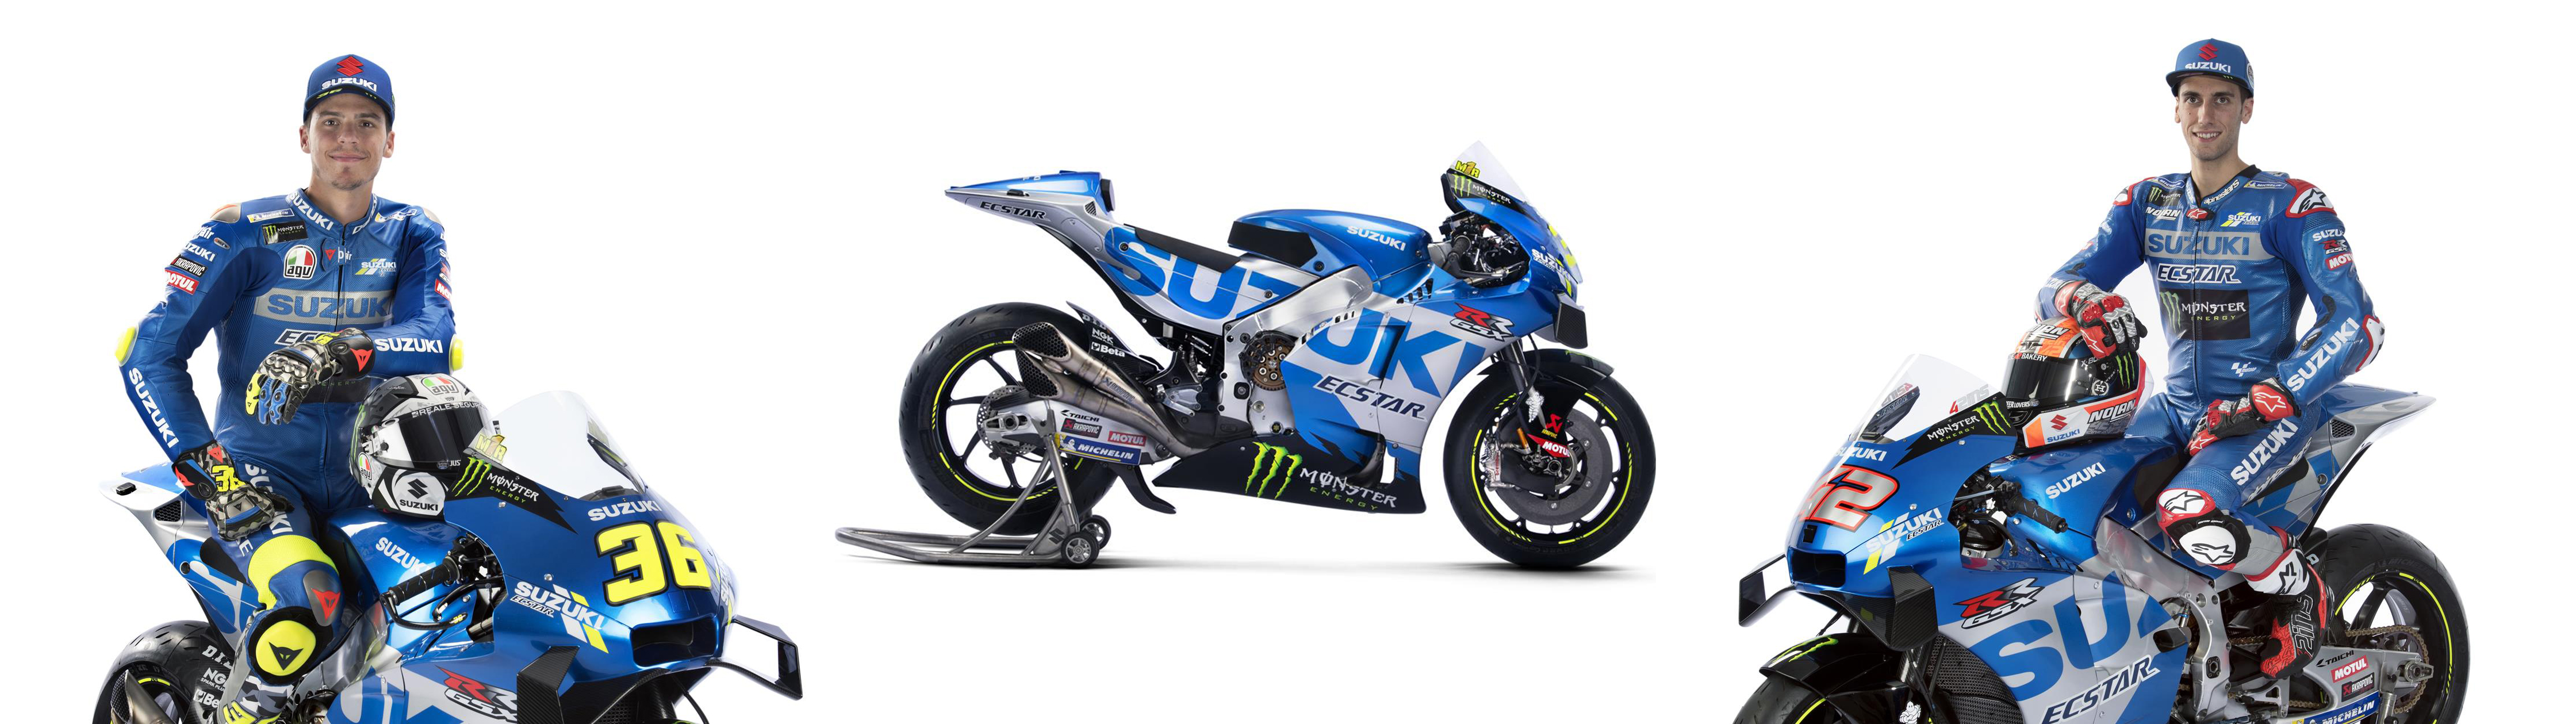 Suzuki Cycles's 2021 MotoGP Line Up And Livery Unveiled